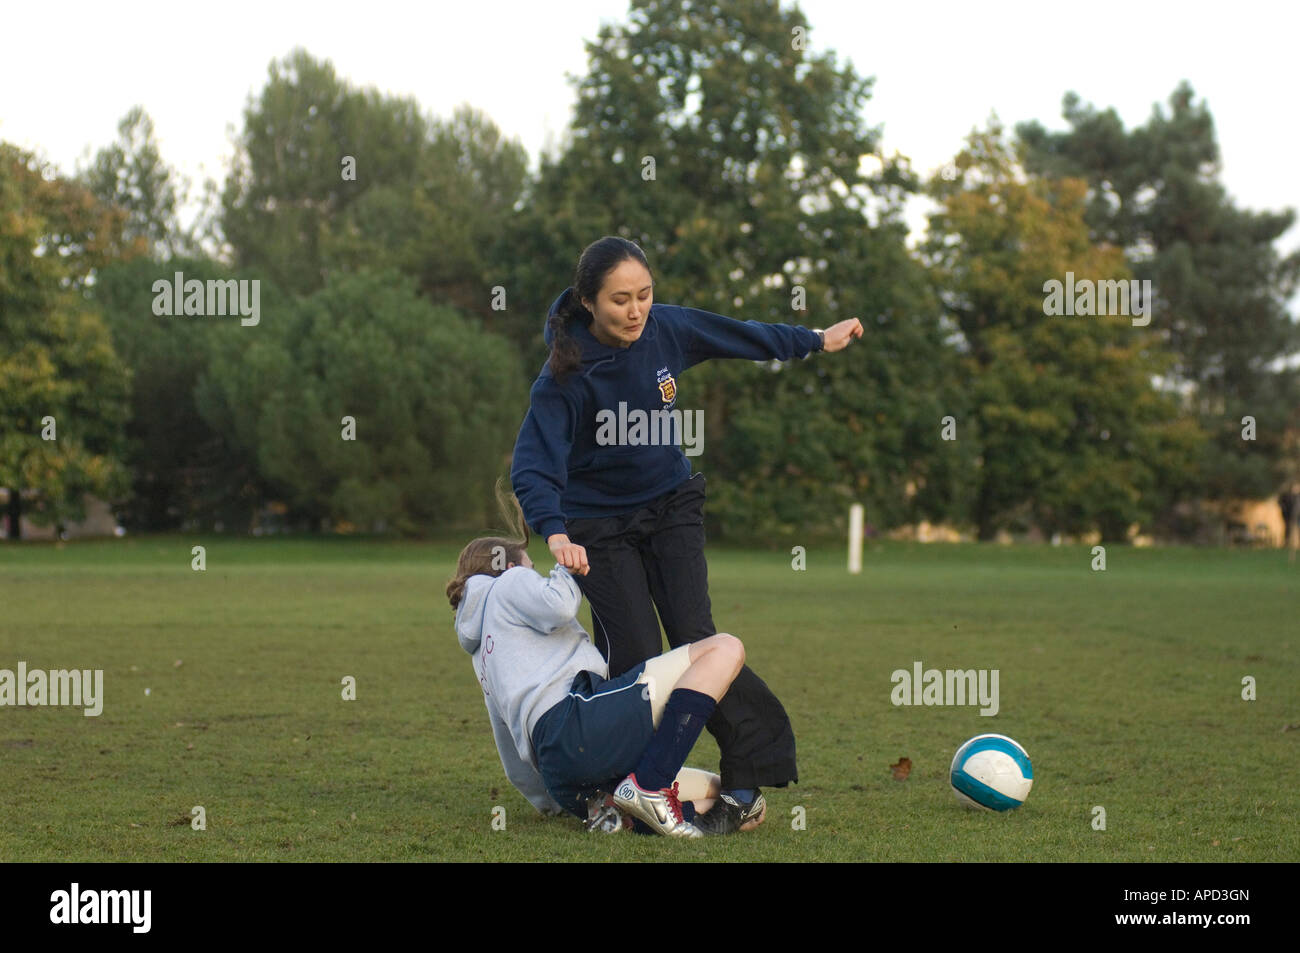 Girls football one of the fastest growing sports here a heavy tackle comes in to win the ball Stock Photo